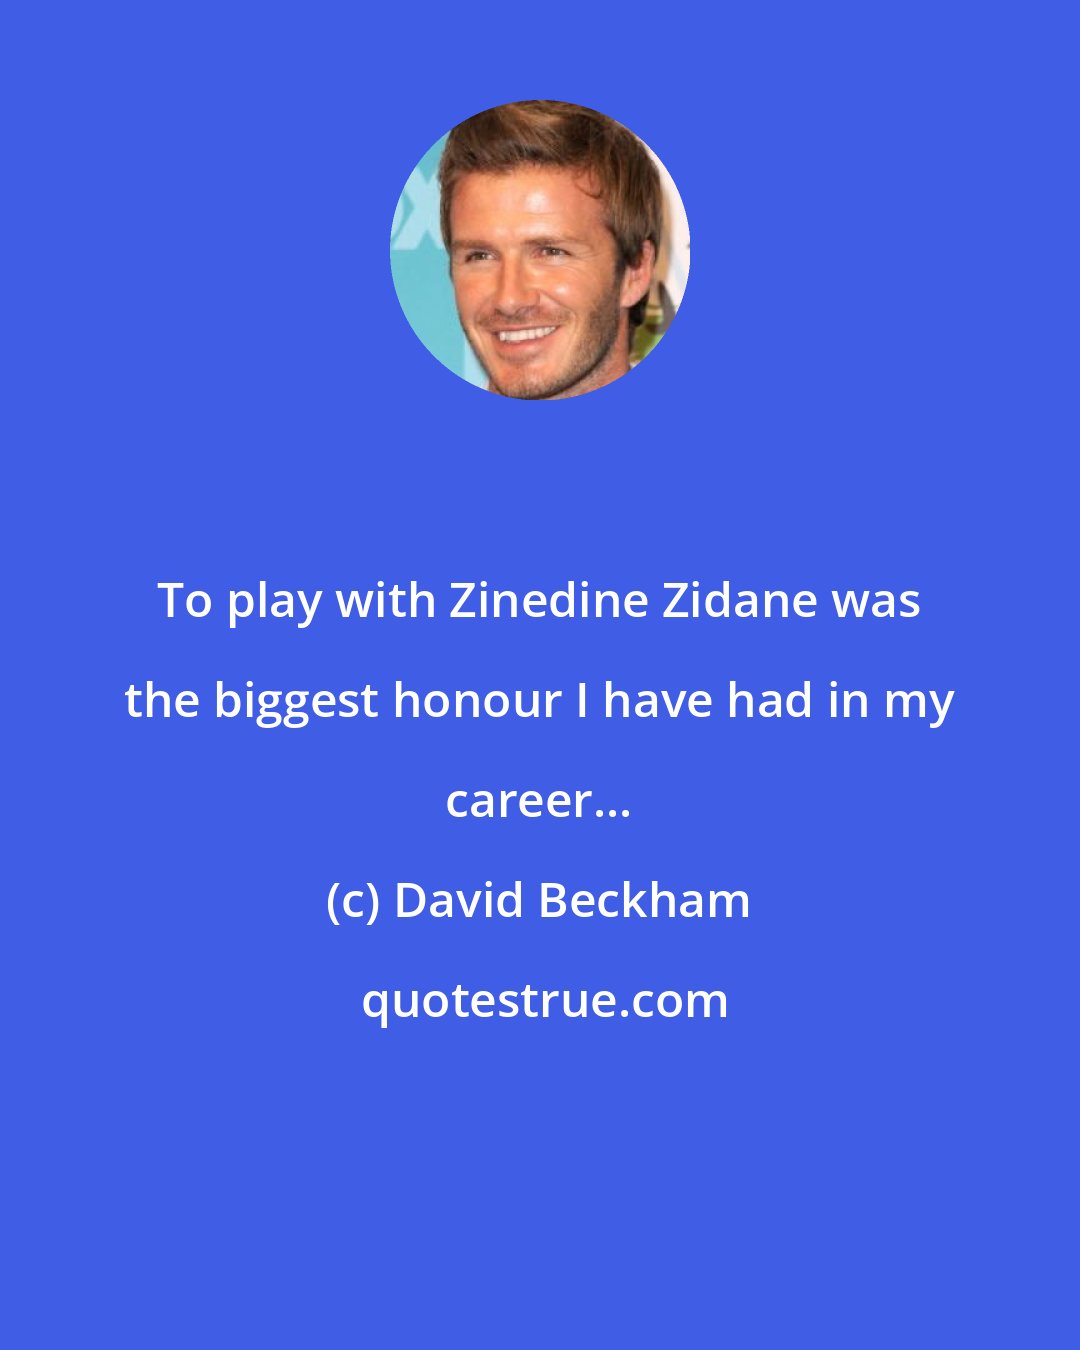 David Beckham: To play with Zinedine Zidane was the biggest honour I have had in my career...